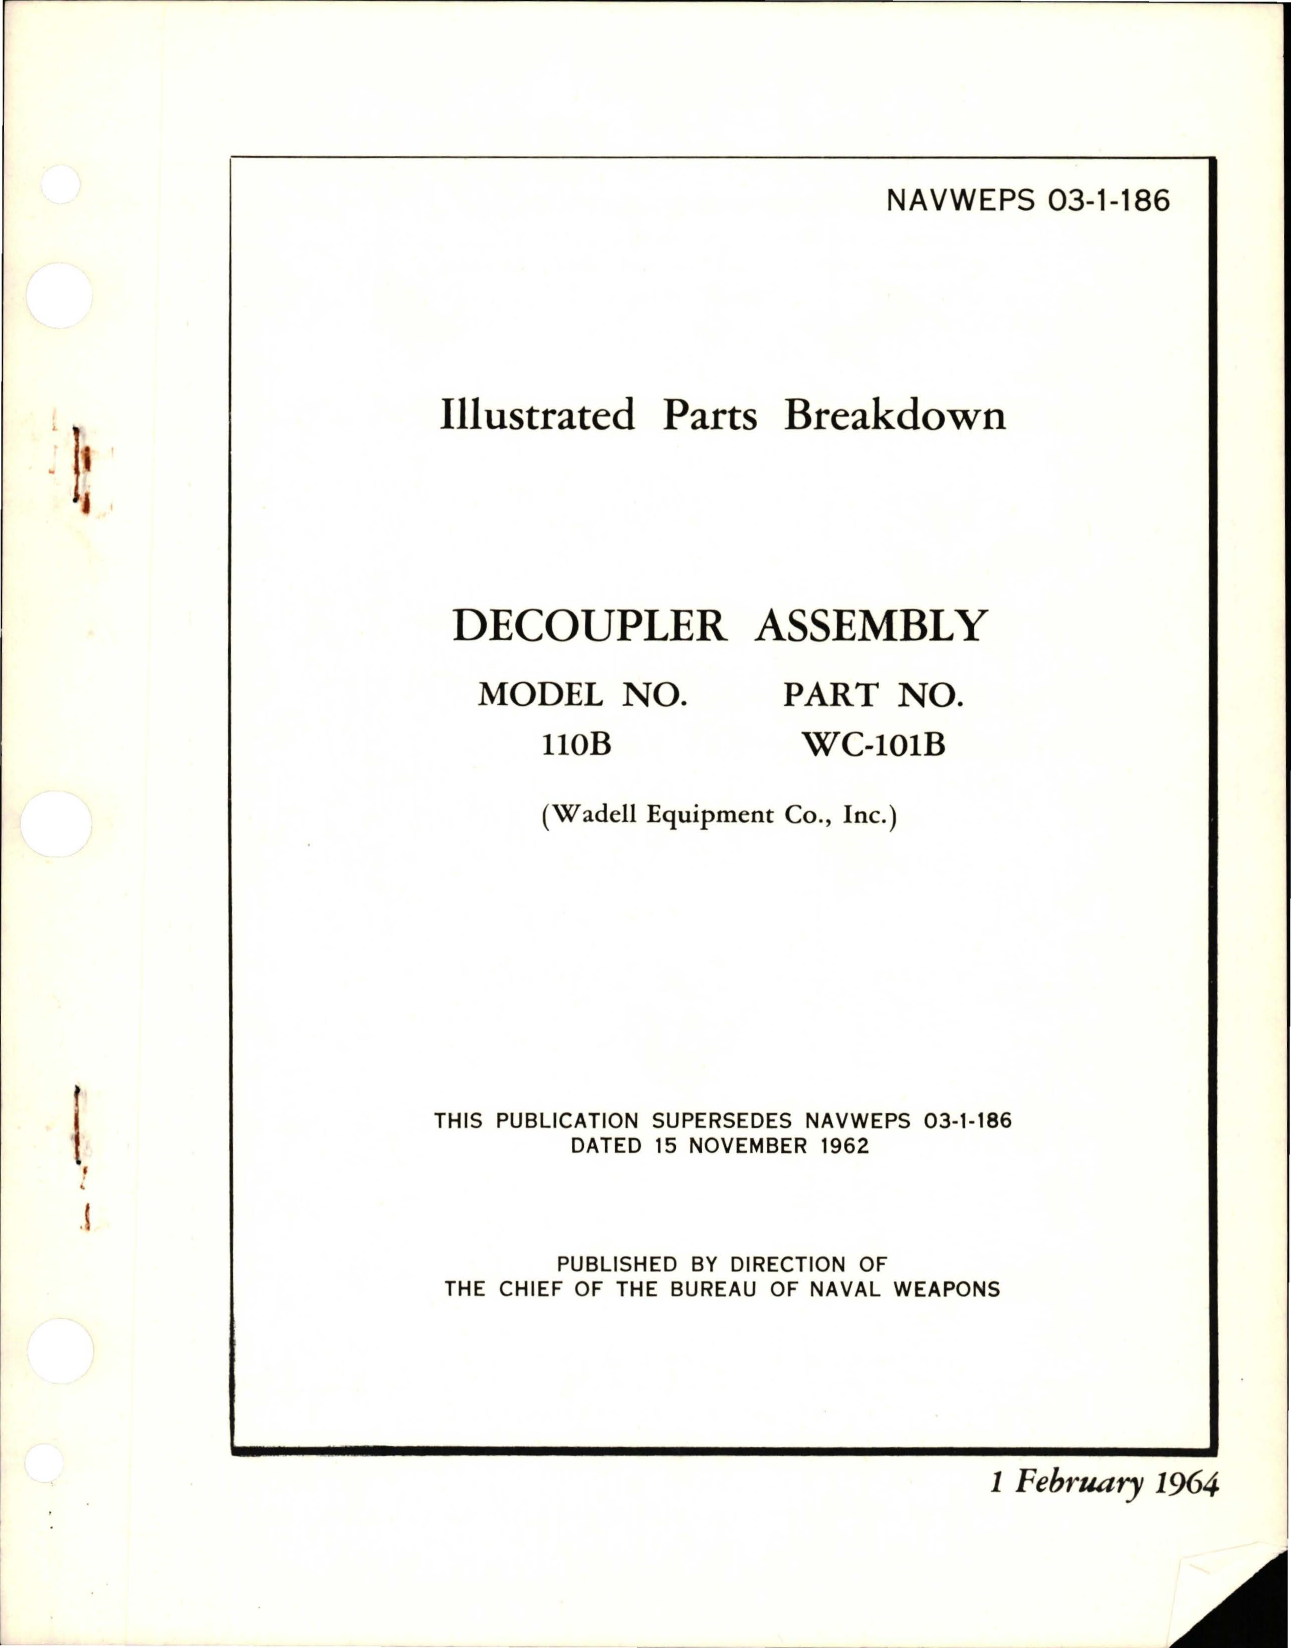 Sample page 1 from AirCorps Library document: Illustrated Parts Breakdown for Decoupler Assembly - Model 110B - Part WC-101B